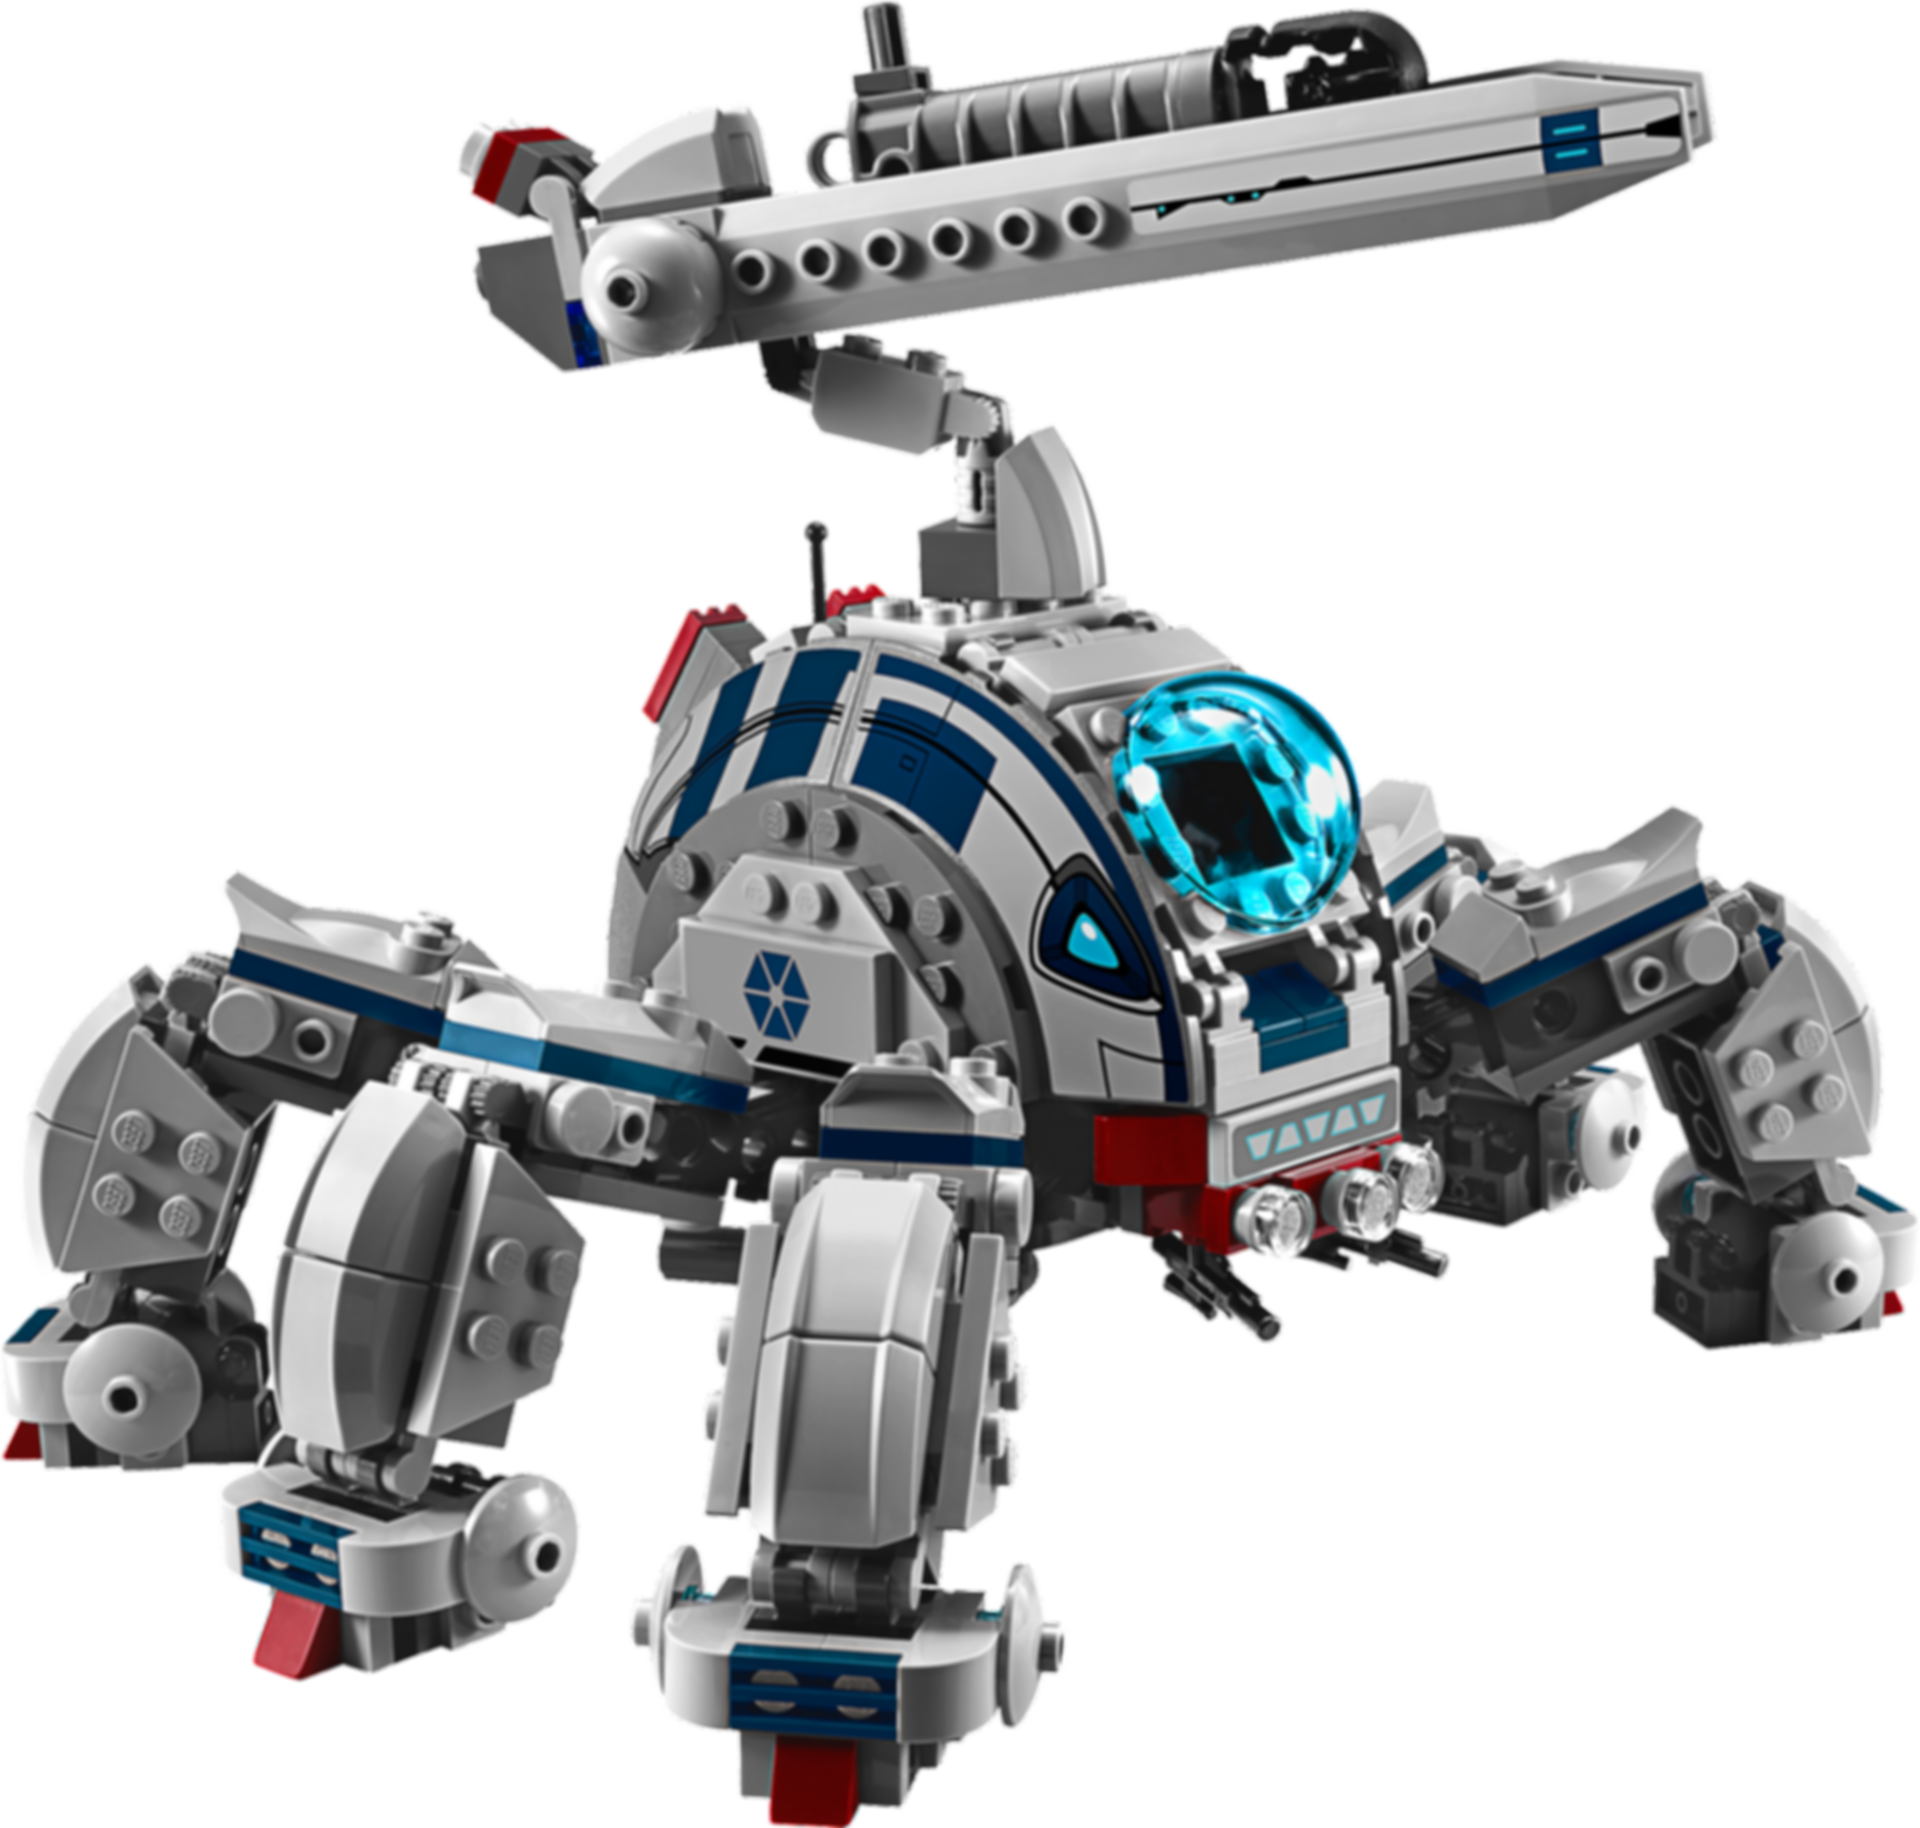 LEGO® Star Wars Umbaran MHC (Mobile Heavy Cannon) composants